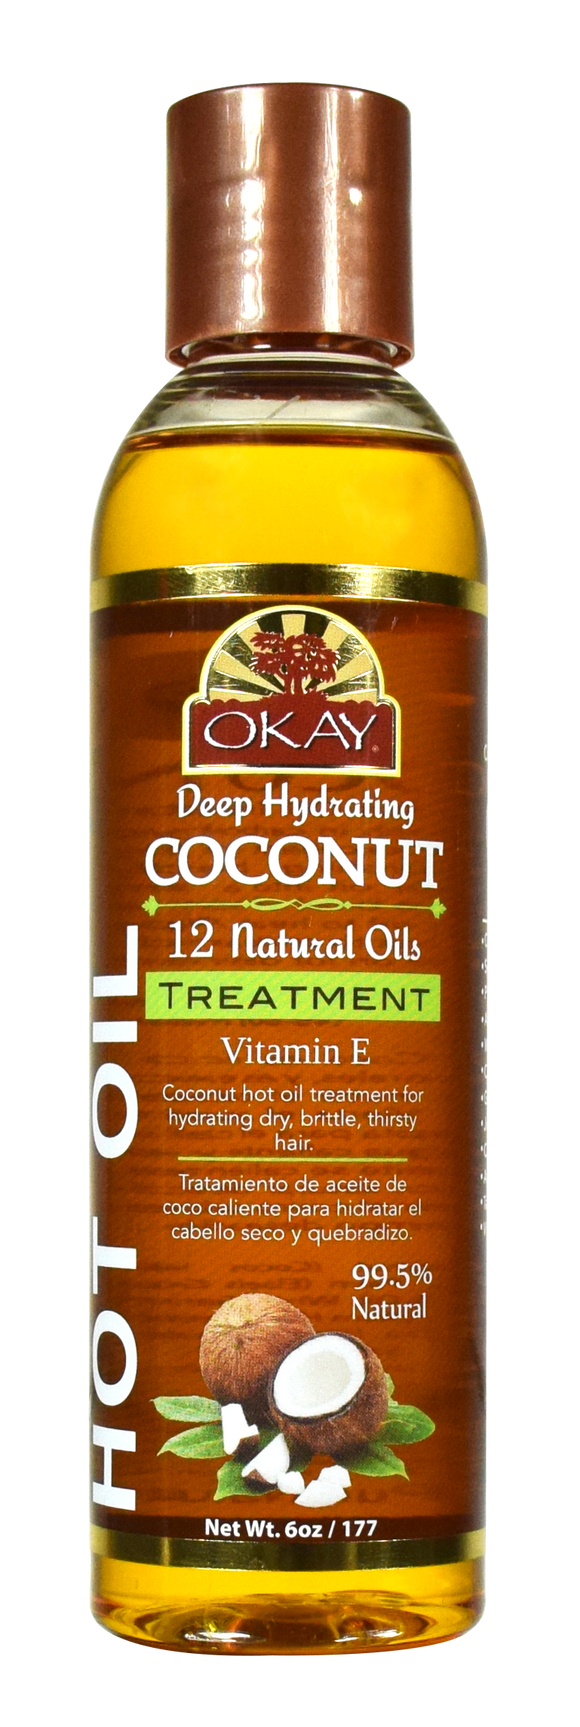 OKAY Coconut Hot Oil Treatment Deep Hydrating - Conditioning And Nourishing - Prevents Breakage- Restores Hair - Smoothes Cuticle-Improves Hair Appearance- Silicone, Paraben Free For All Hair Types and Textures - Made in USA 6oz / 177ml